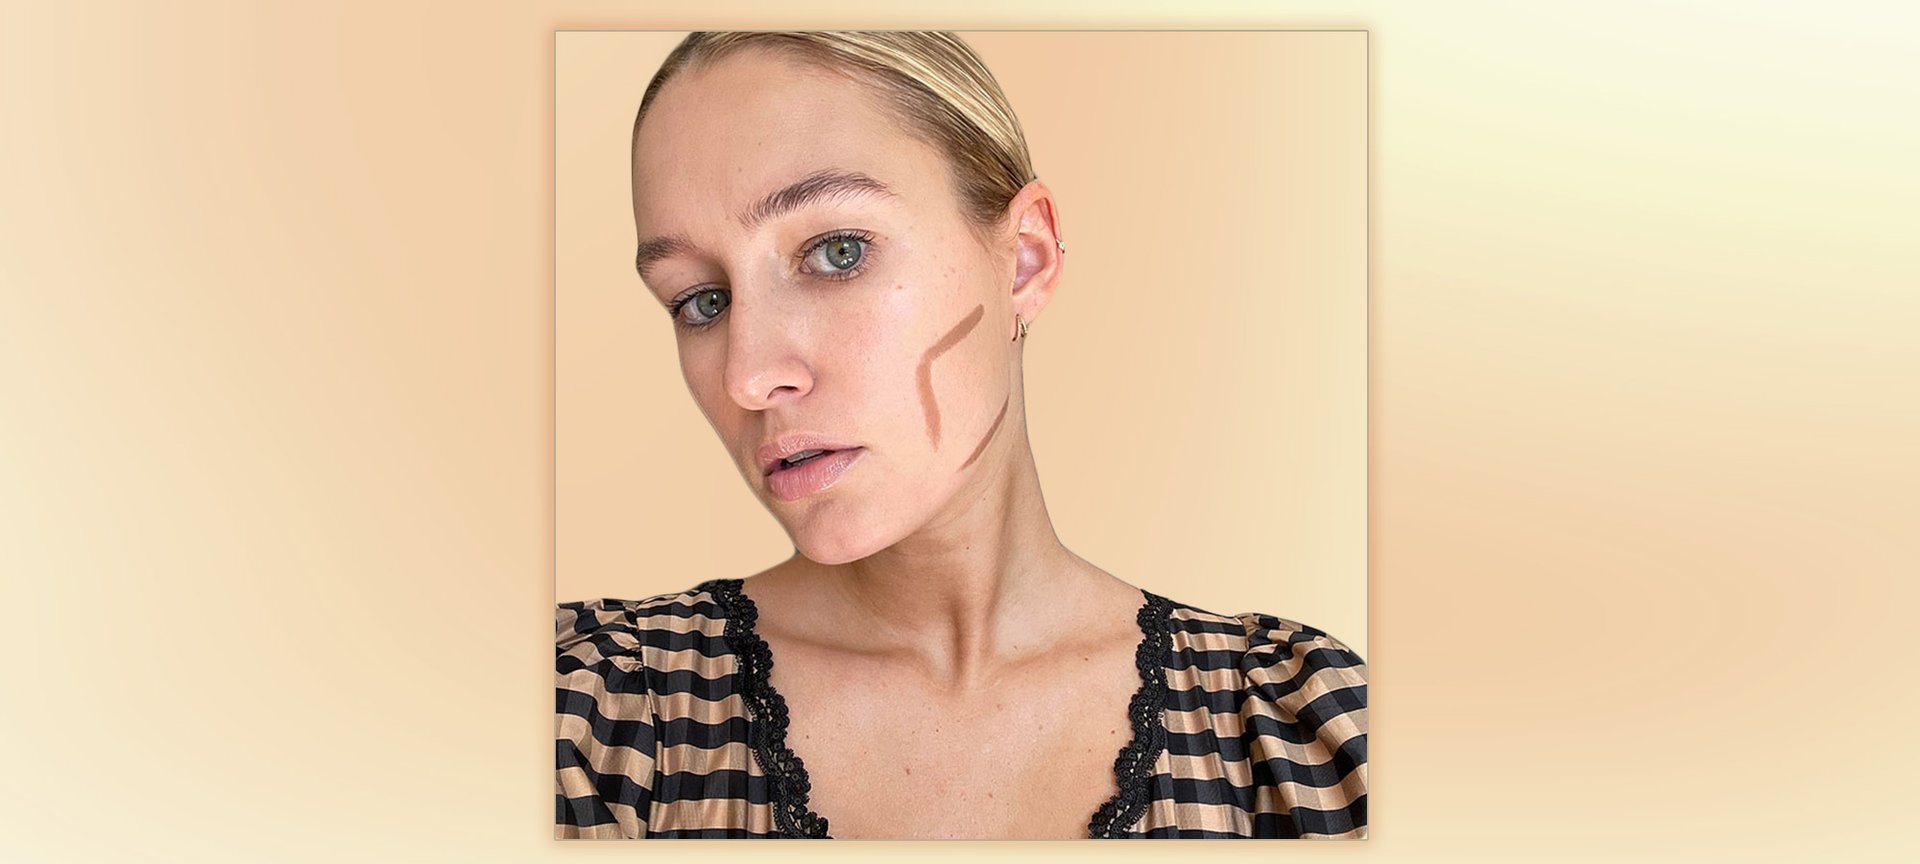 How To Contour: 5 Steps To Perfecting Contouring